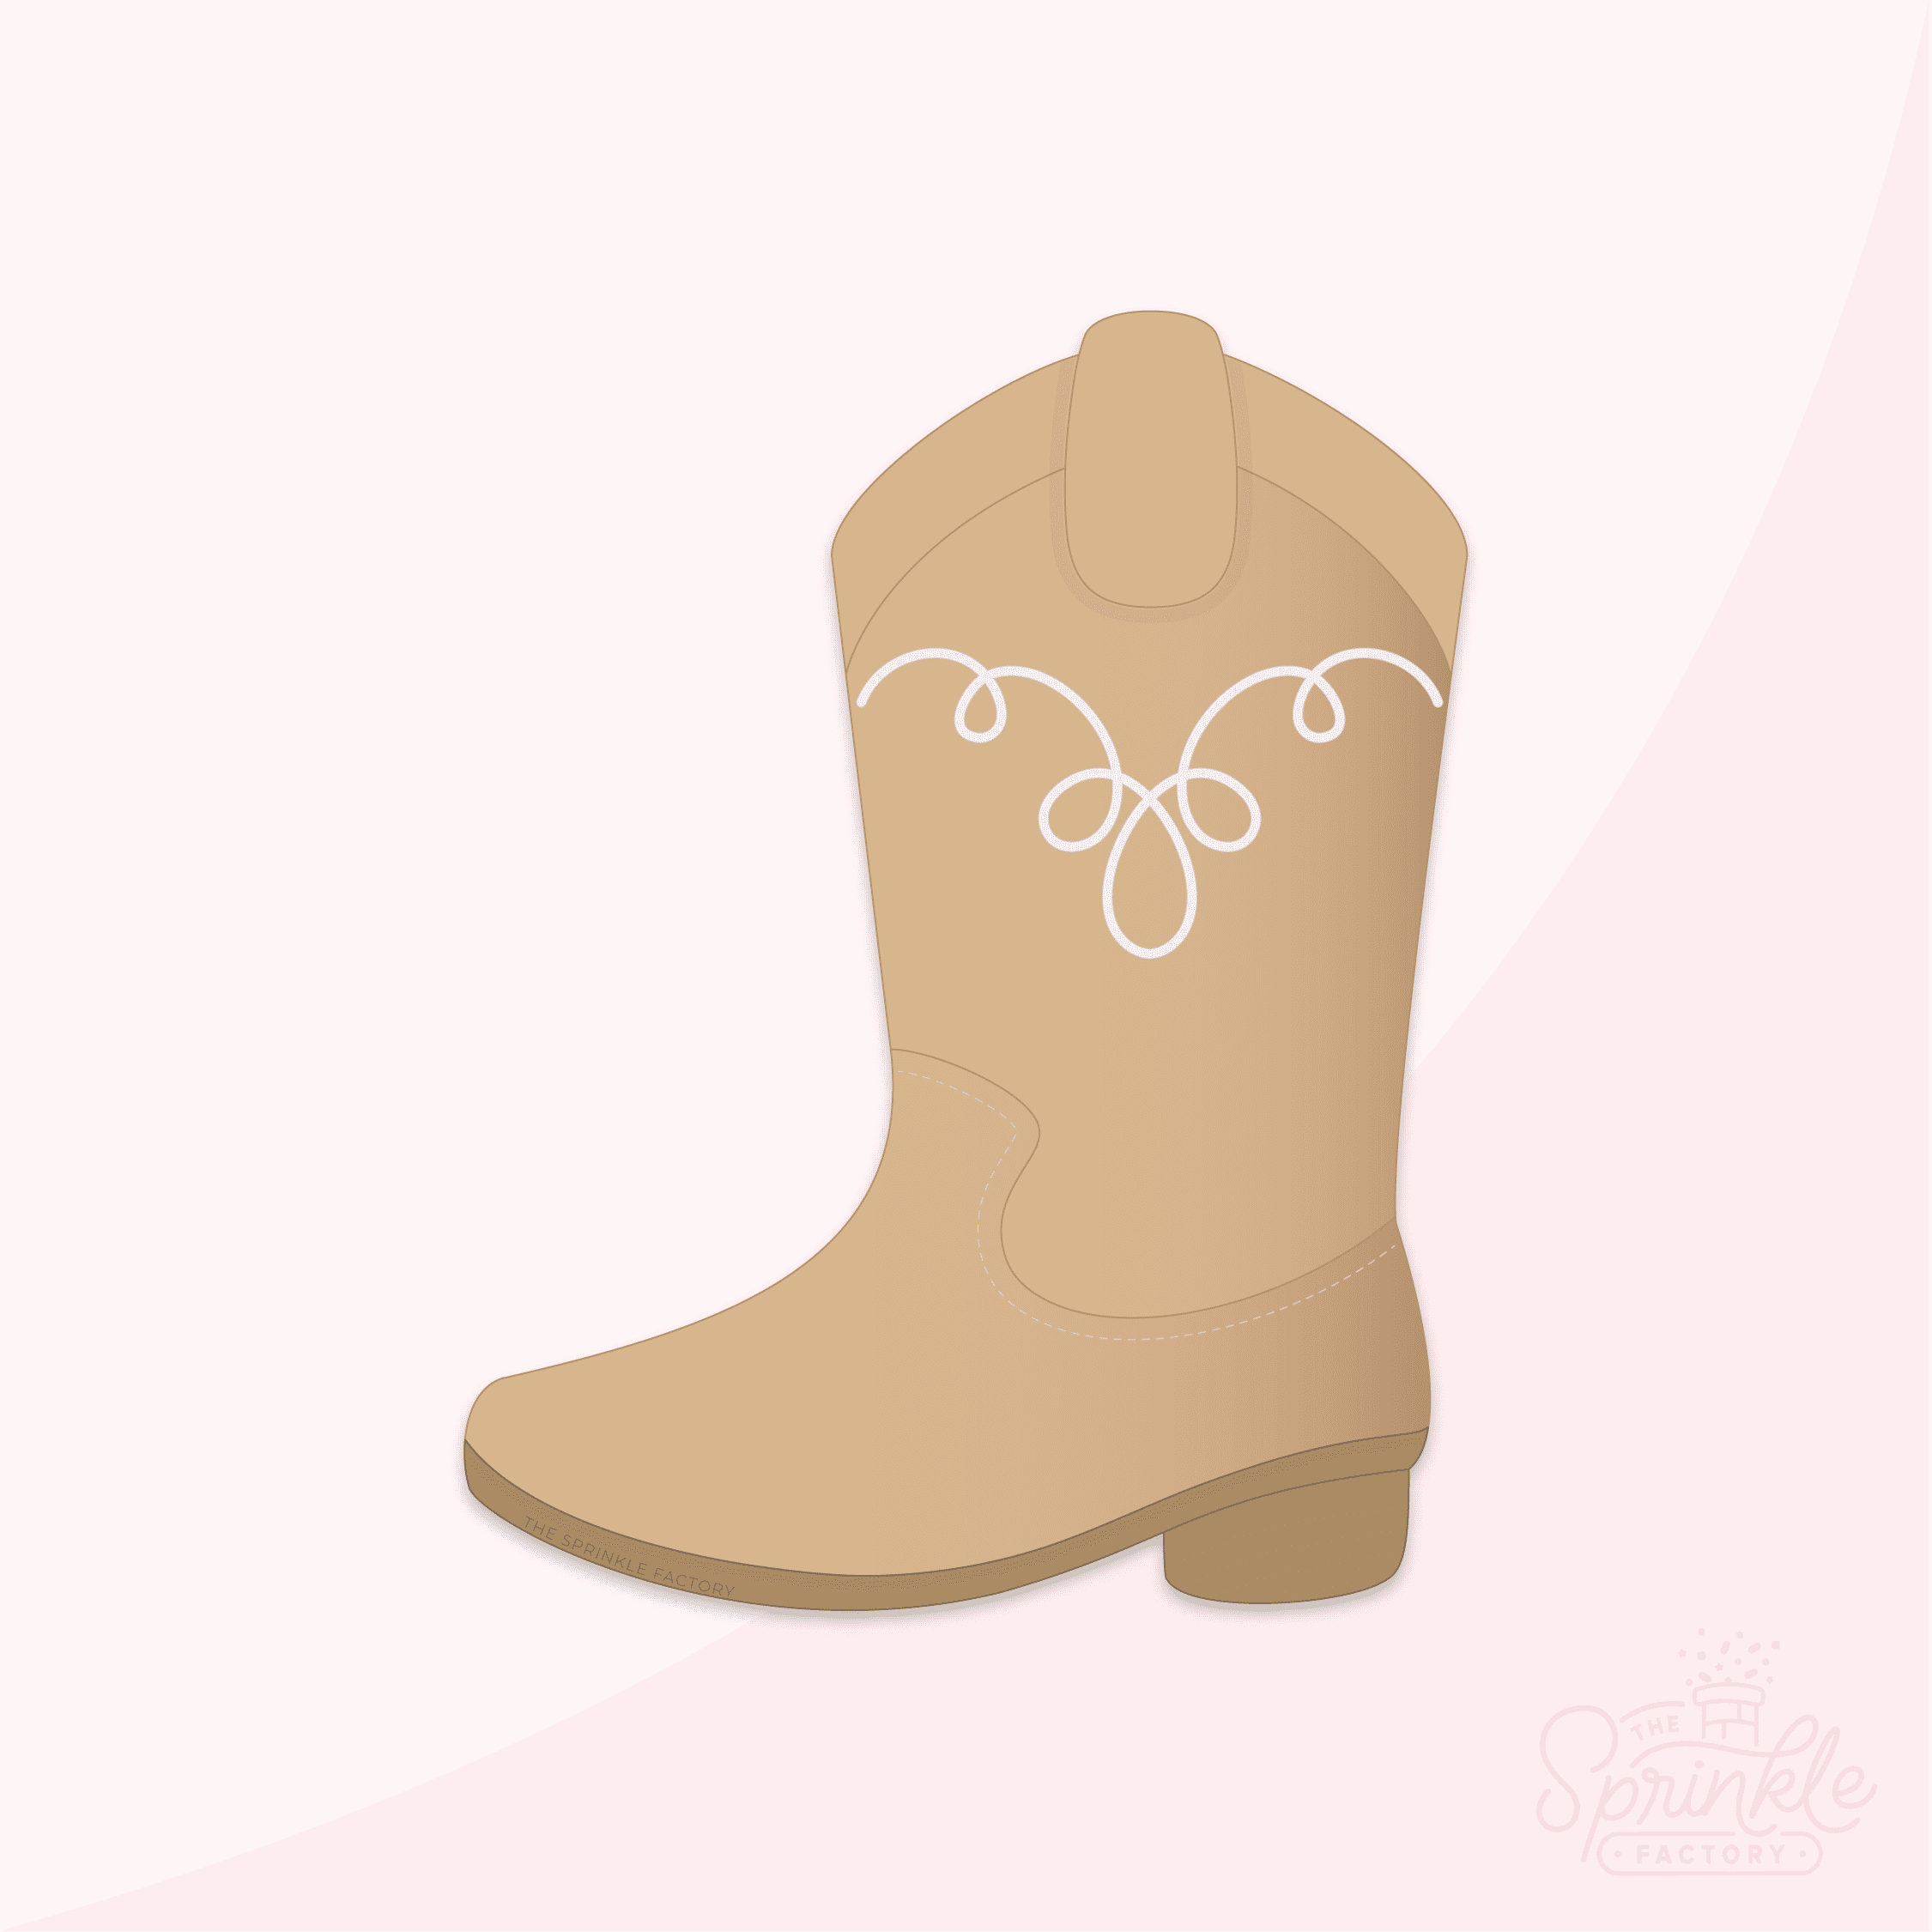 Clipart of a light brown cowboy boot with toe facing left with white swirl detail at the top.